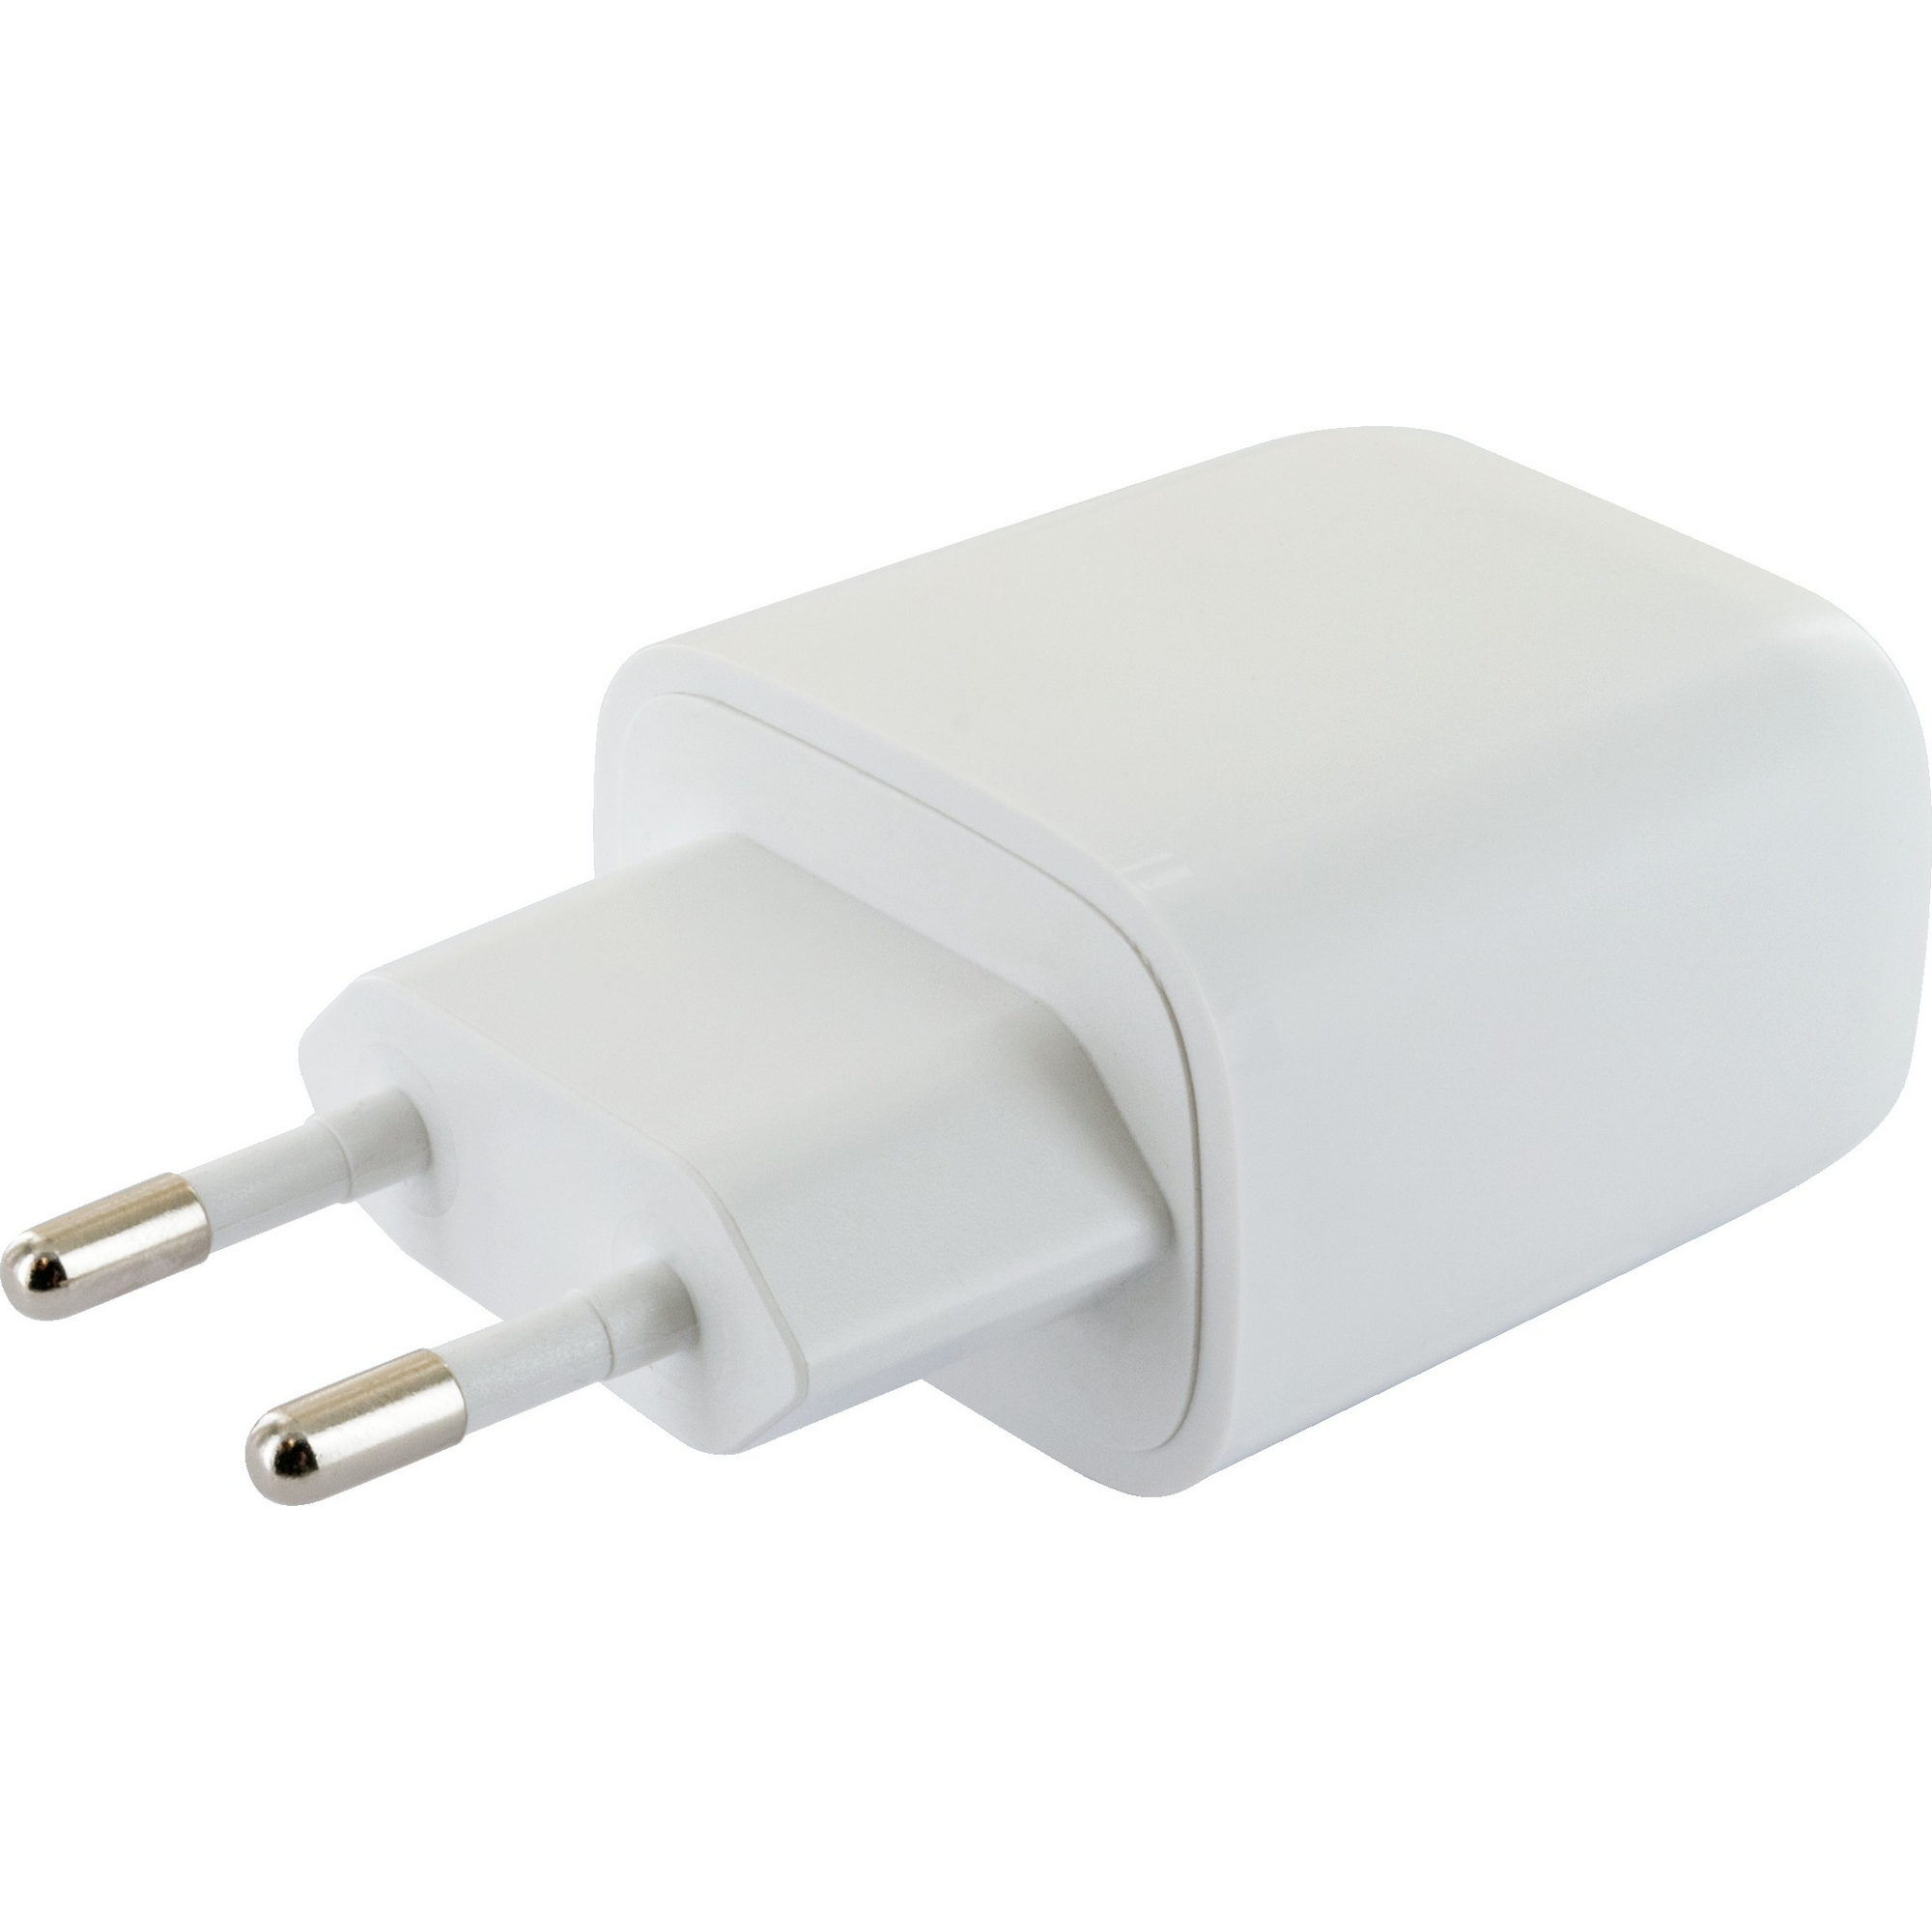 USB-Power-Adapter 'POWER4you' USB 2.0/USB Type-C + product picture